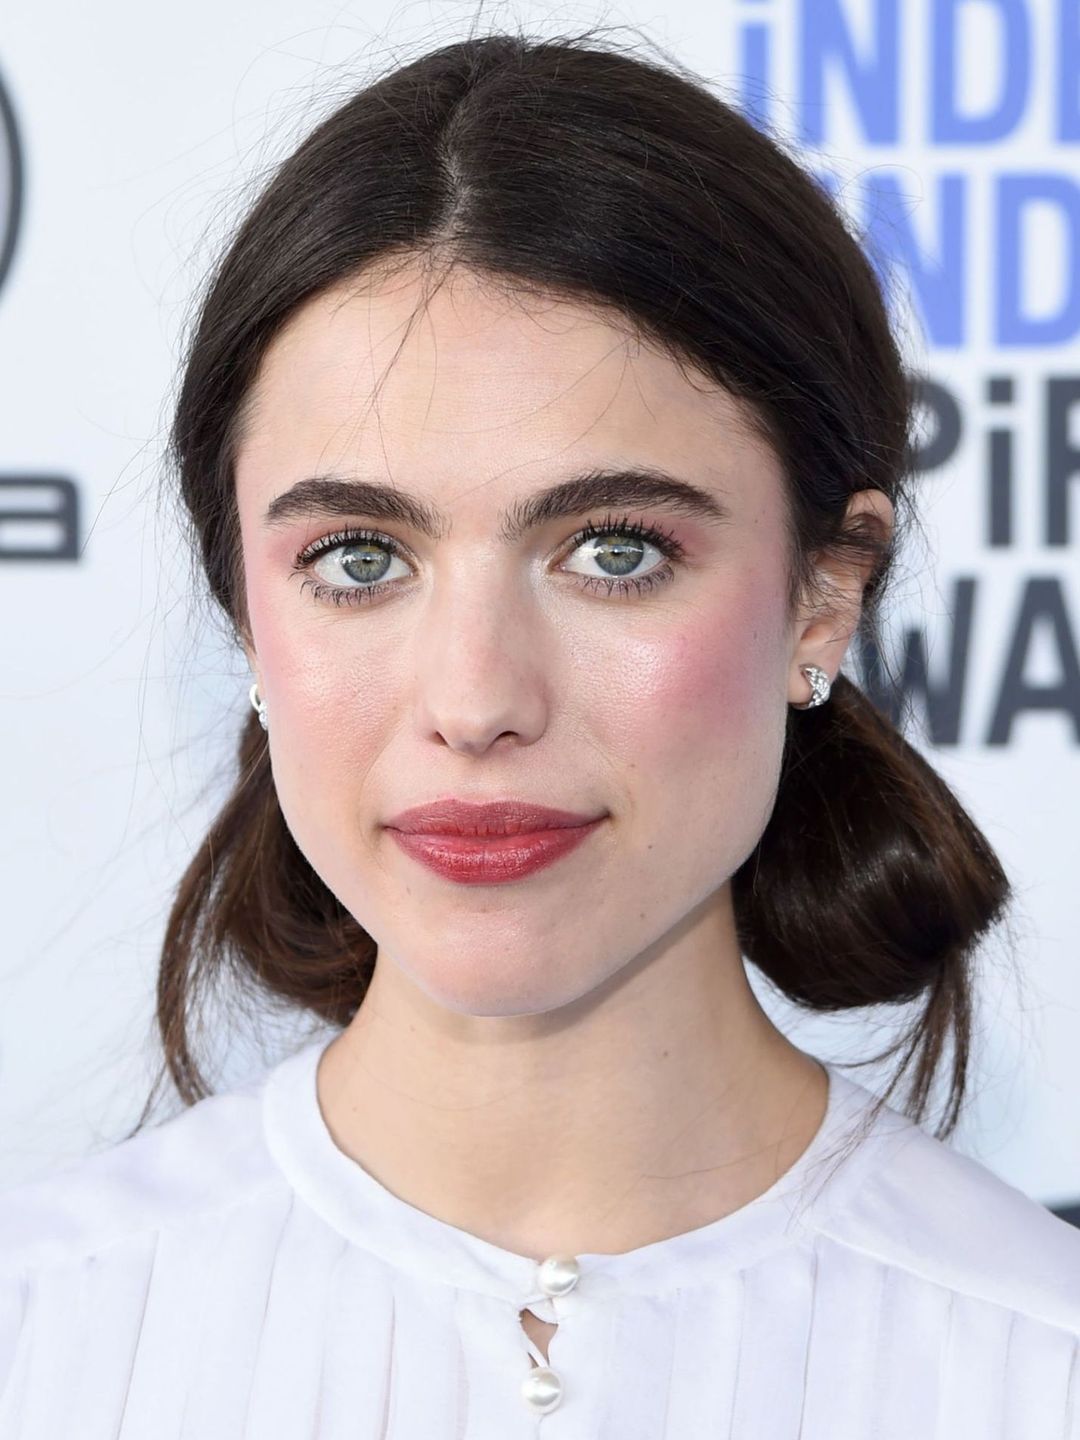 Margaret Qualley young age